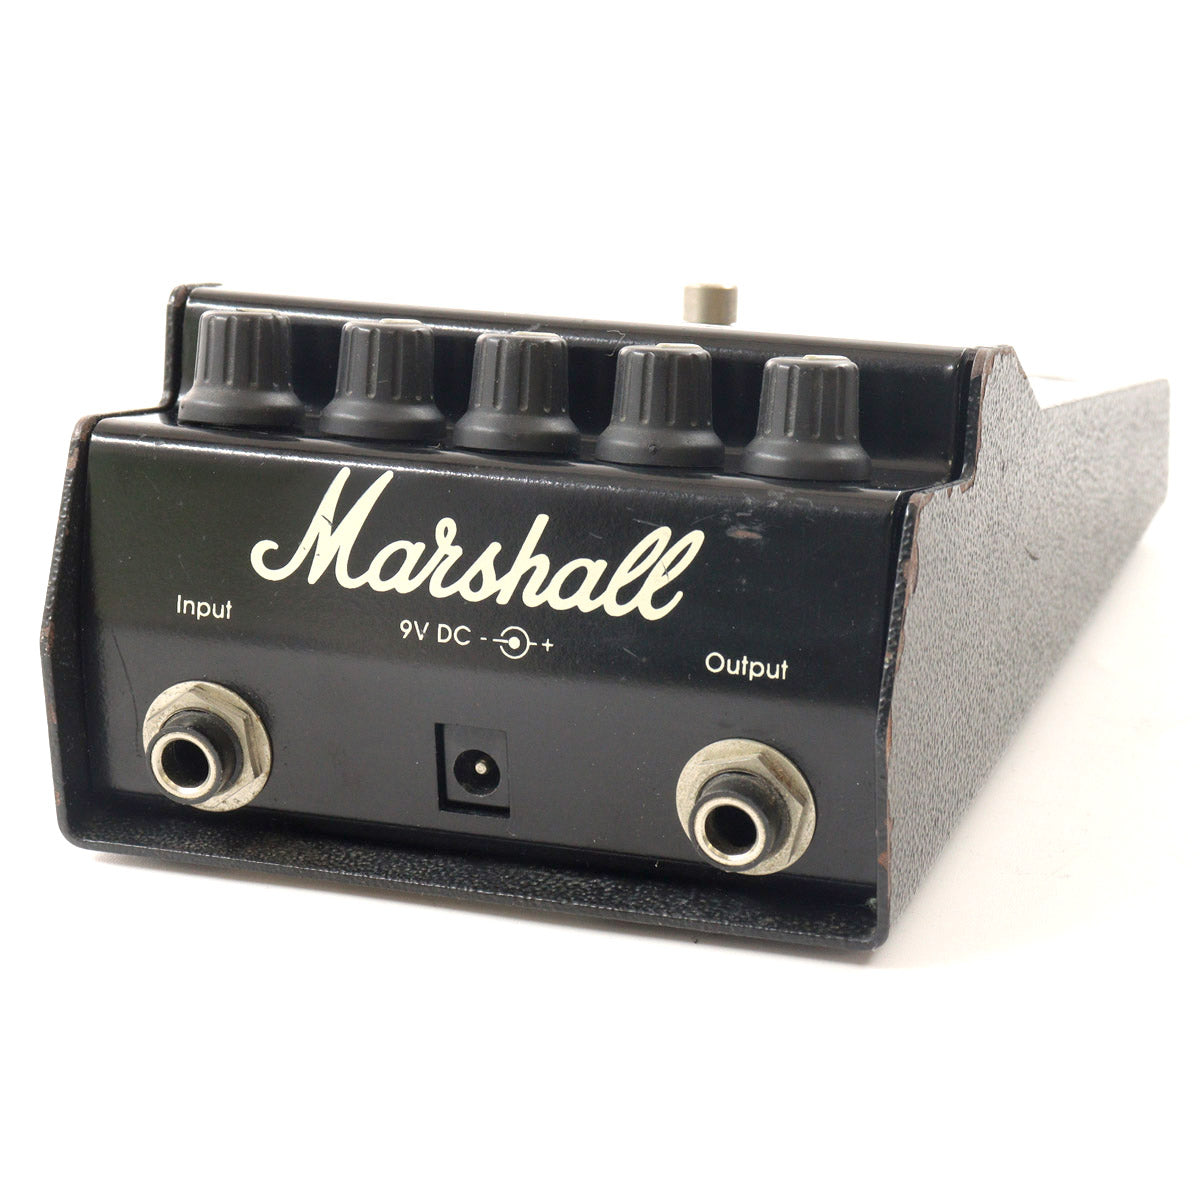 [SN S10018] USED MARSHALL / Shredmaster / Made in England Distortion for guitar [08]